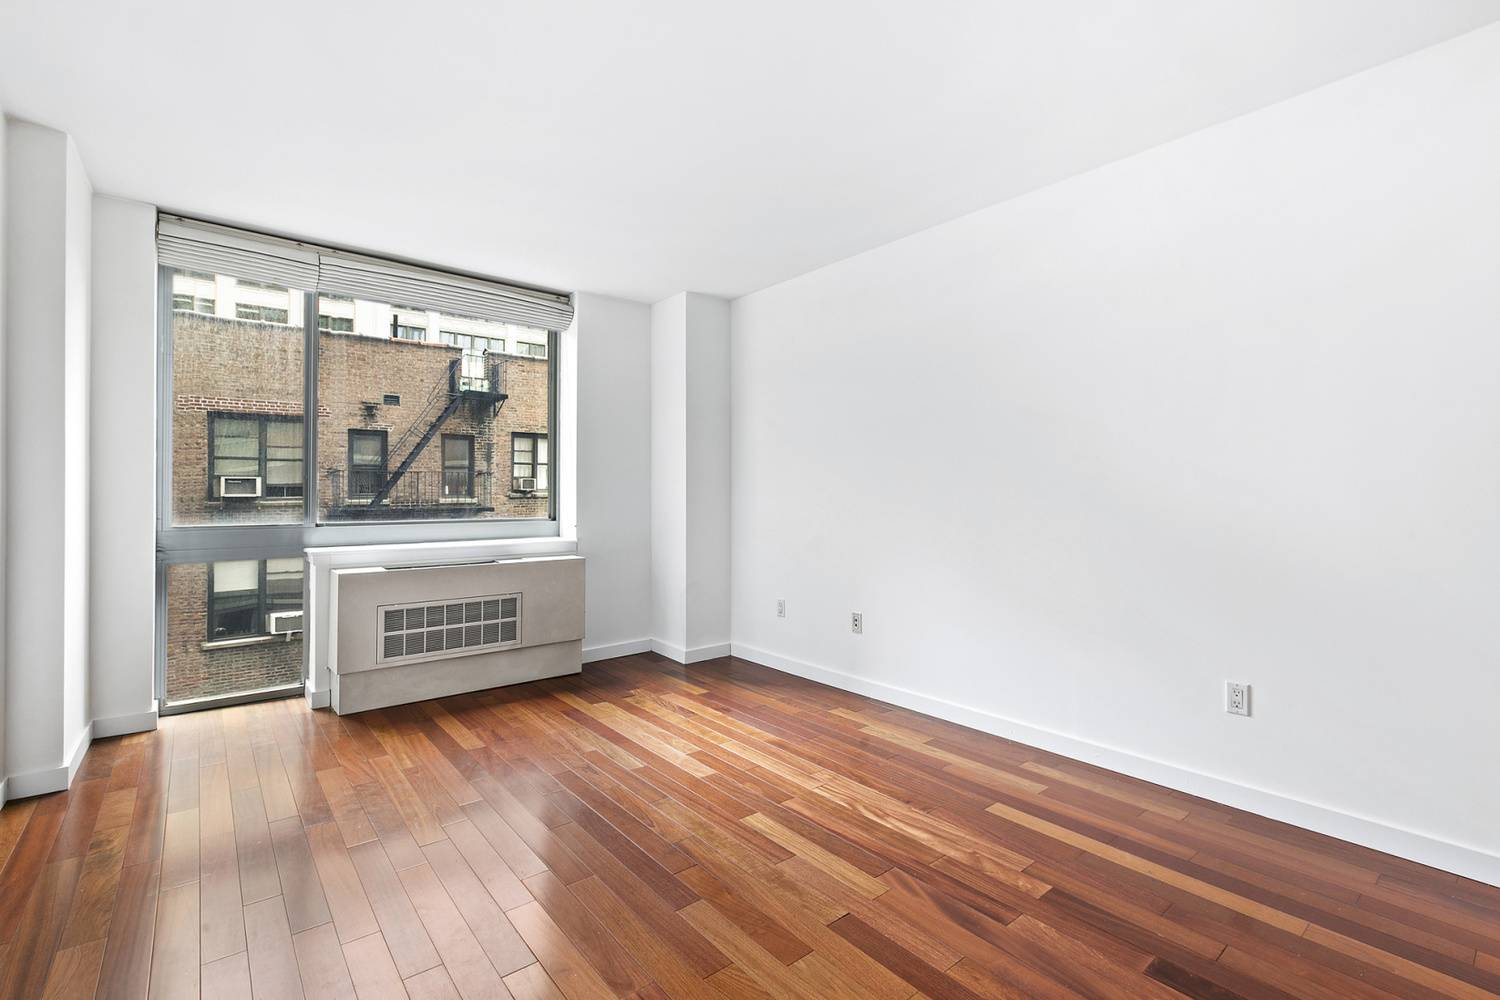 This mint condition studio with cherry hardwood floors is located in the desirable Crossing 23rd, steps from Madison Square Park.